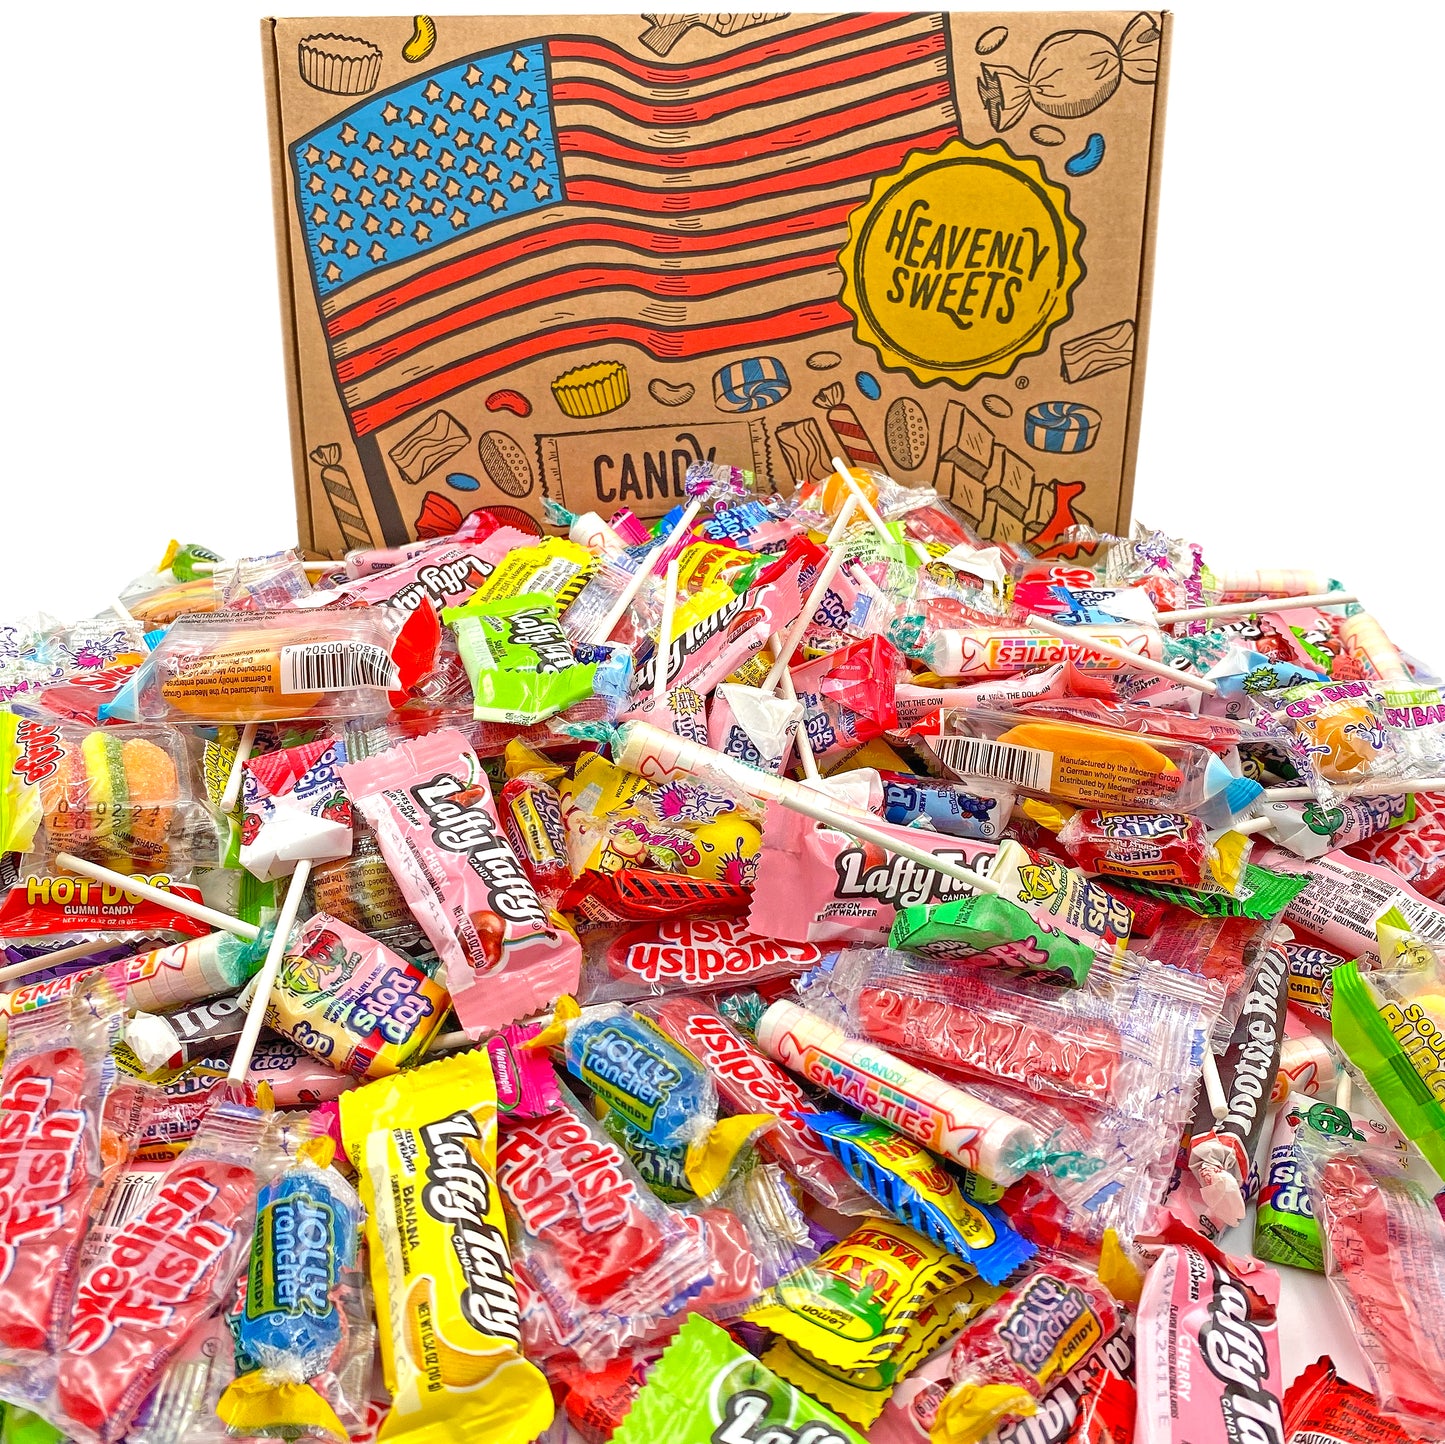 100+ Piece Miniatures American Party Candy Sweets Hamper